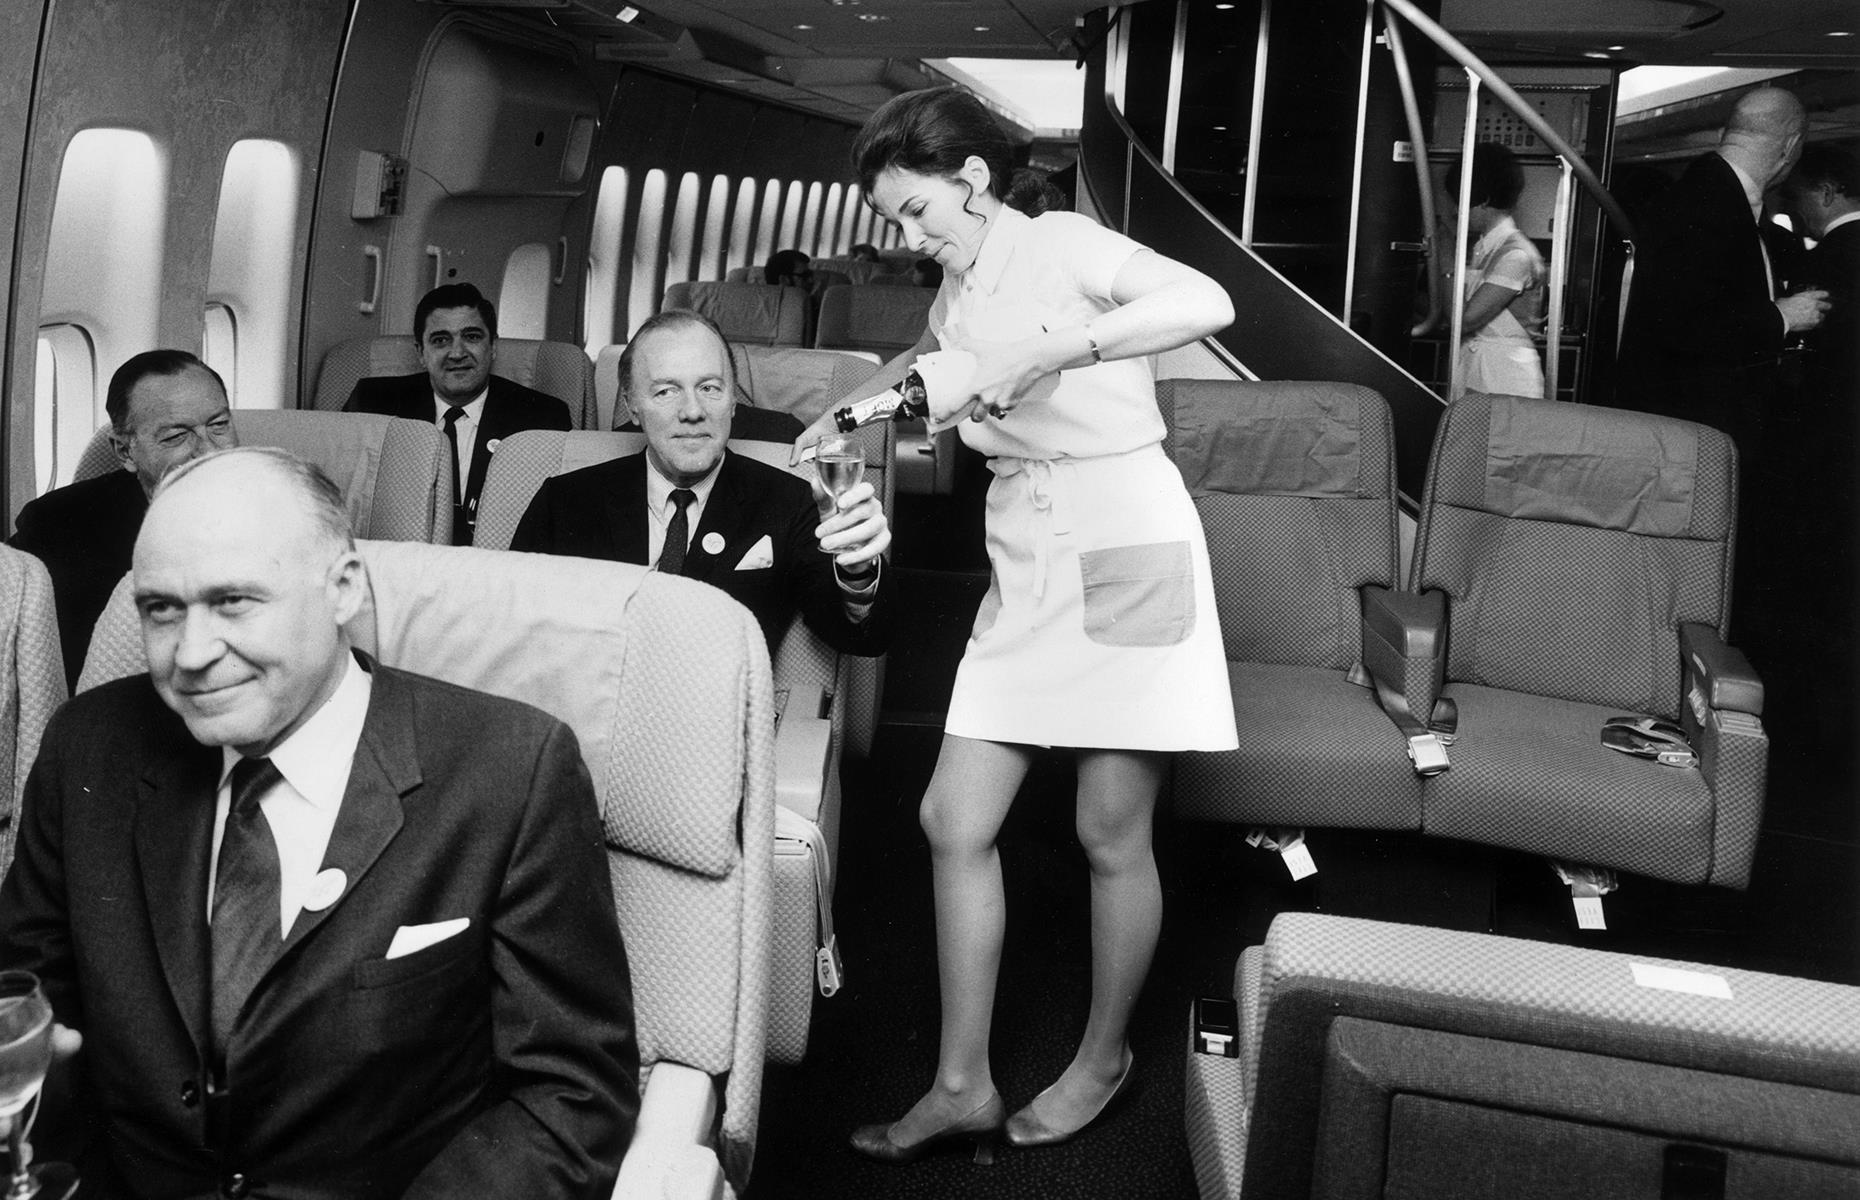 Those passengers who could afford it needn't skimp on luxury, though. Here, travelers in first class are served Champagne by a flight attendant on a Boeing 747 operated by Pan Am in 1970.